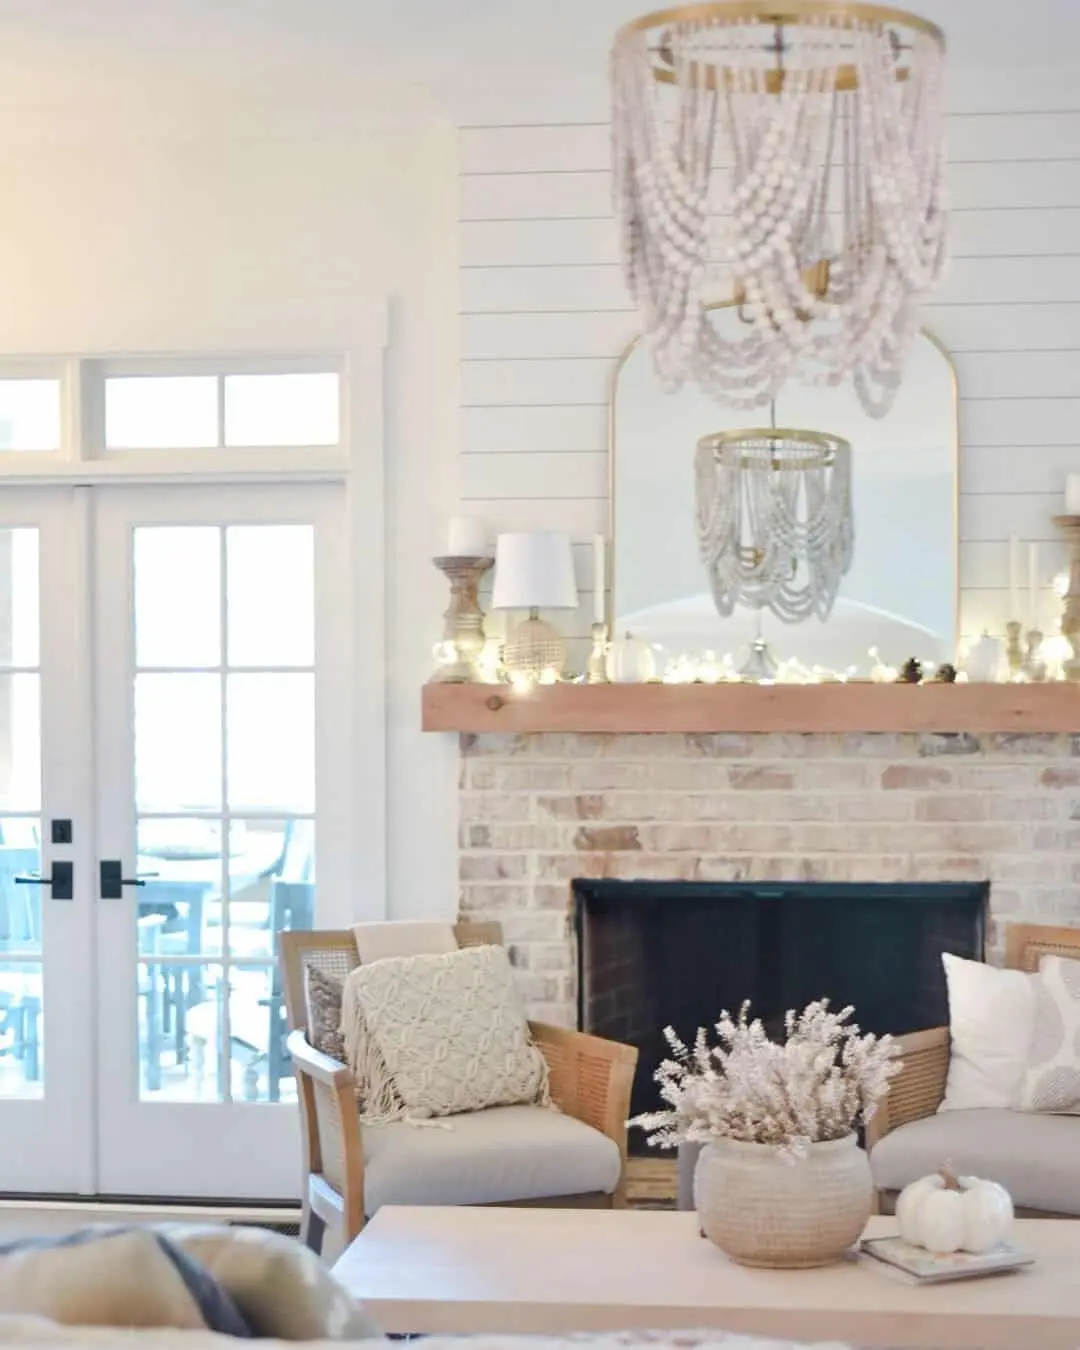 Mirror above fireplace ideas; This large mirror in a sleek brass metal frame is here to steal the show. Its oversized dimensions demand attention, making it the perfect piece to sit proudly on a mantel or lean against the wall. And oh, did we mention its arched design? Talk about adding a touch of timeless elegance!